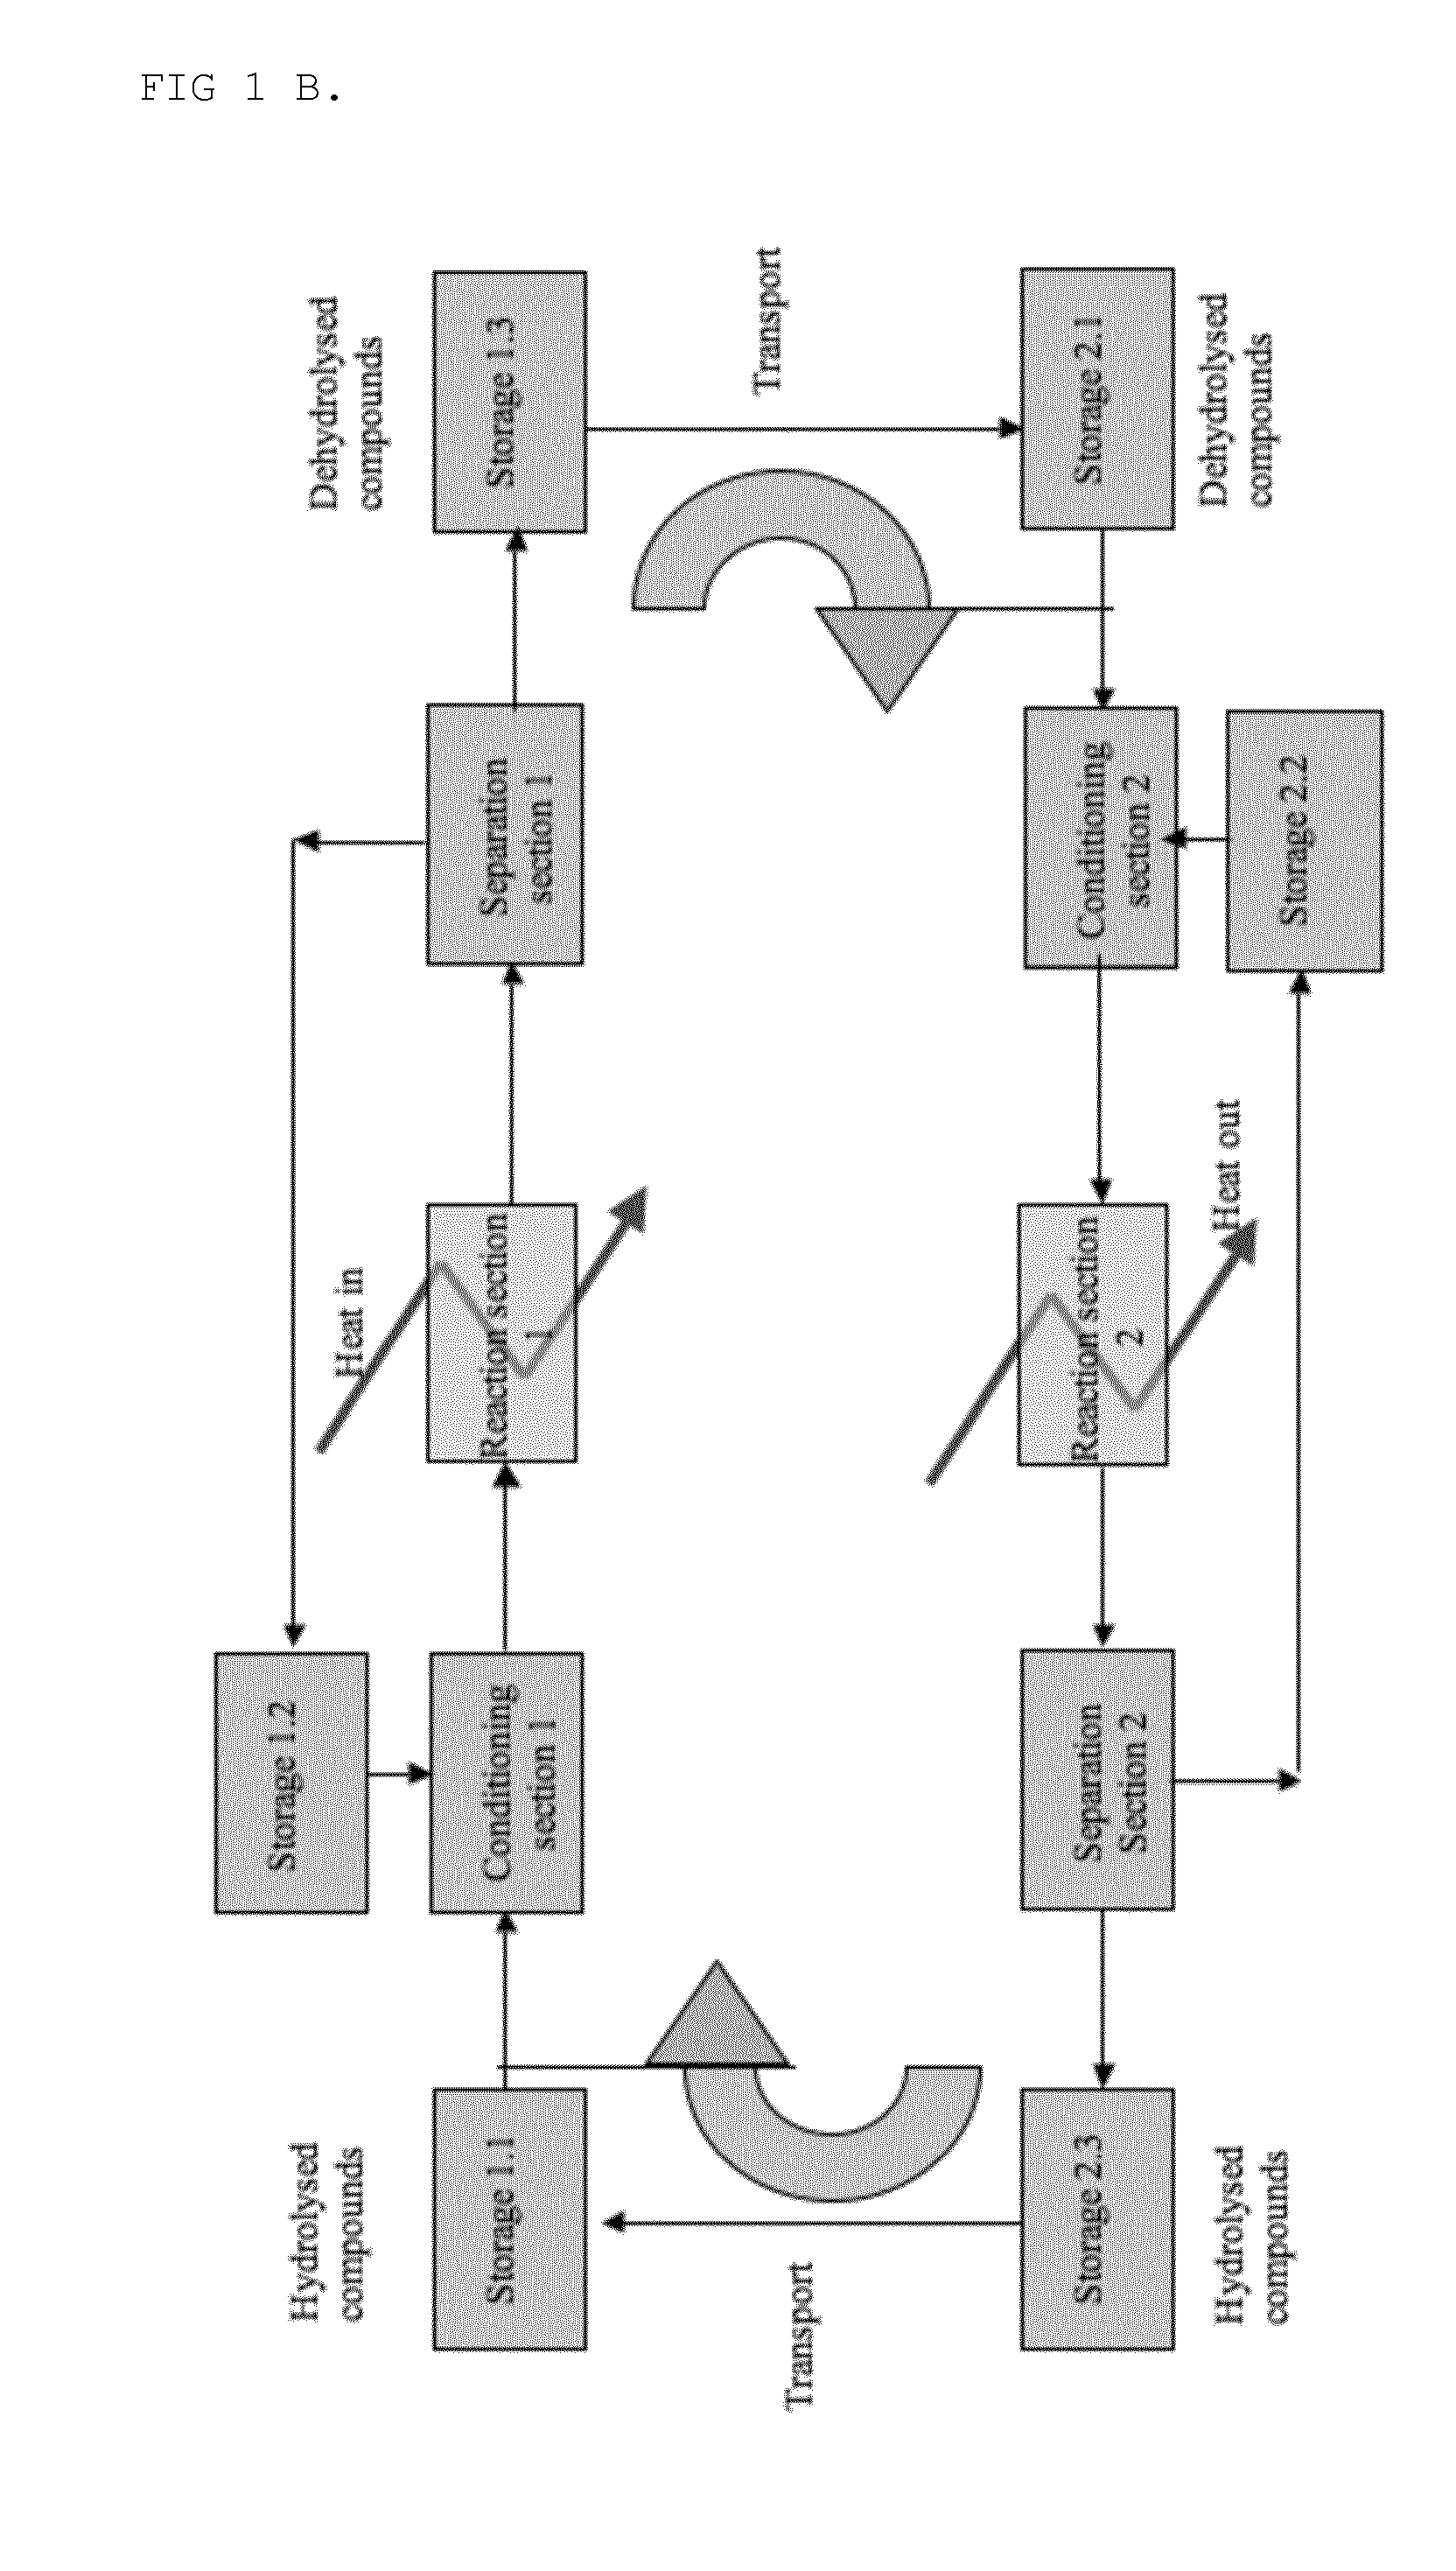 Methods and components for thermal energy storage